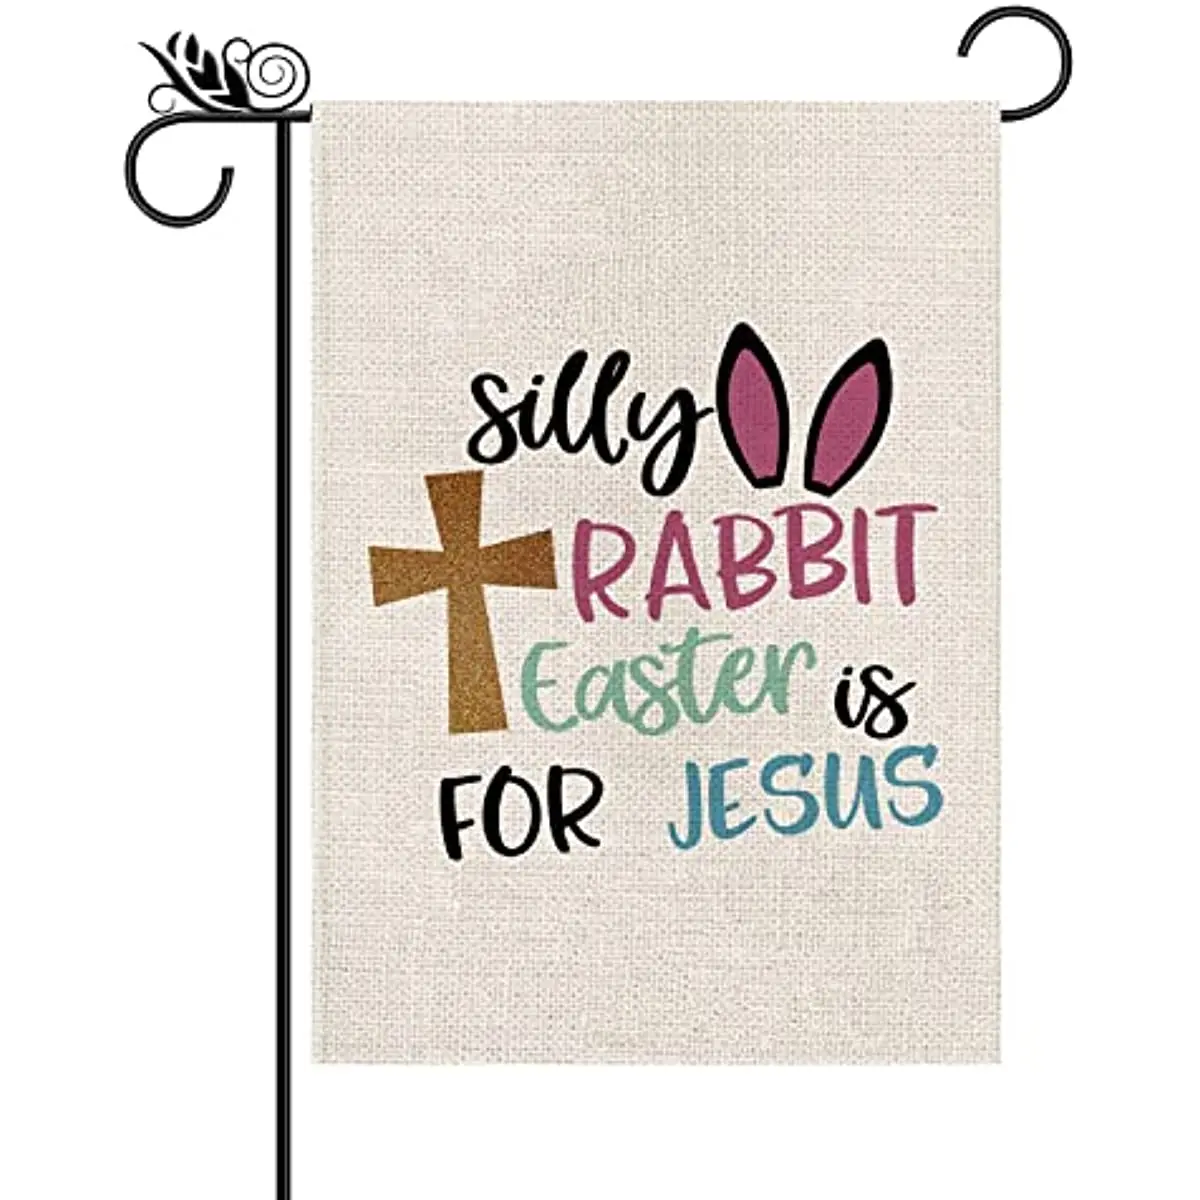 

Easter Garden Flag 12x18 Inch Silly Rabbit Easter is for Jesus Vertical Double Sided Holiday Yard Outdoor Decor